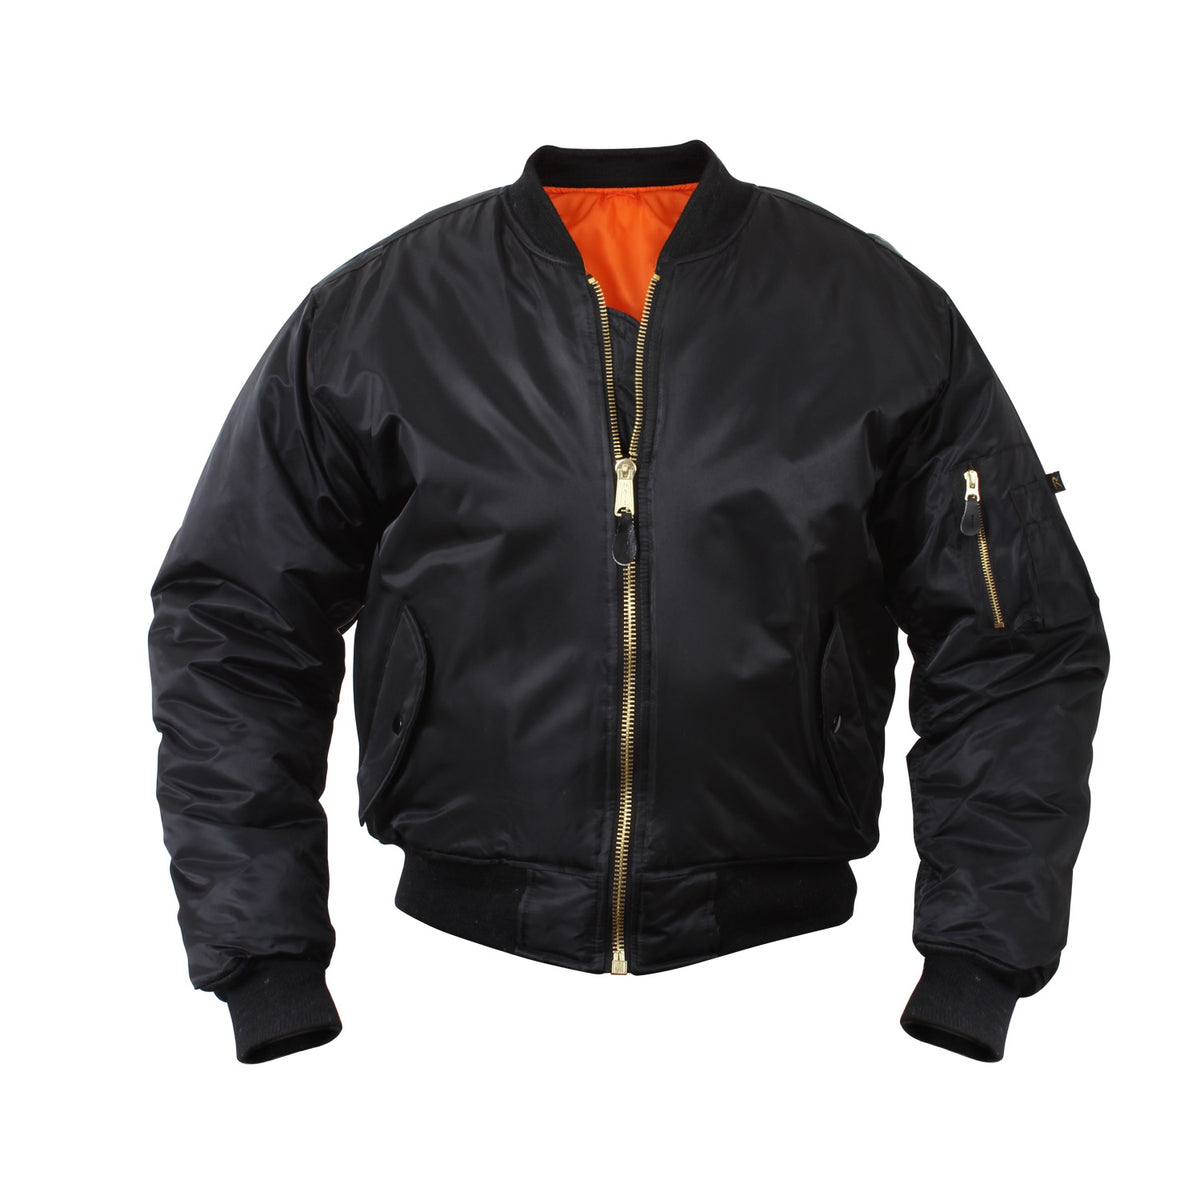 Rothco Concealed Carry MA-1 Flight Jacket